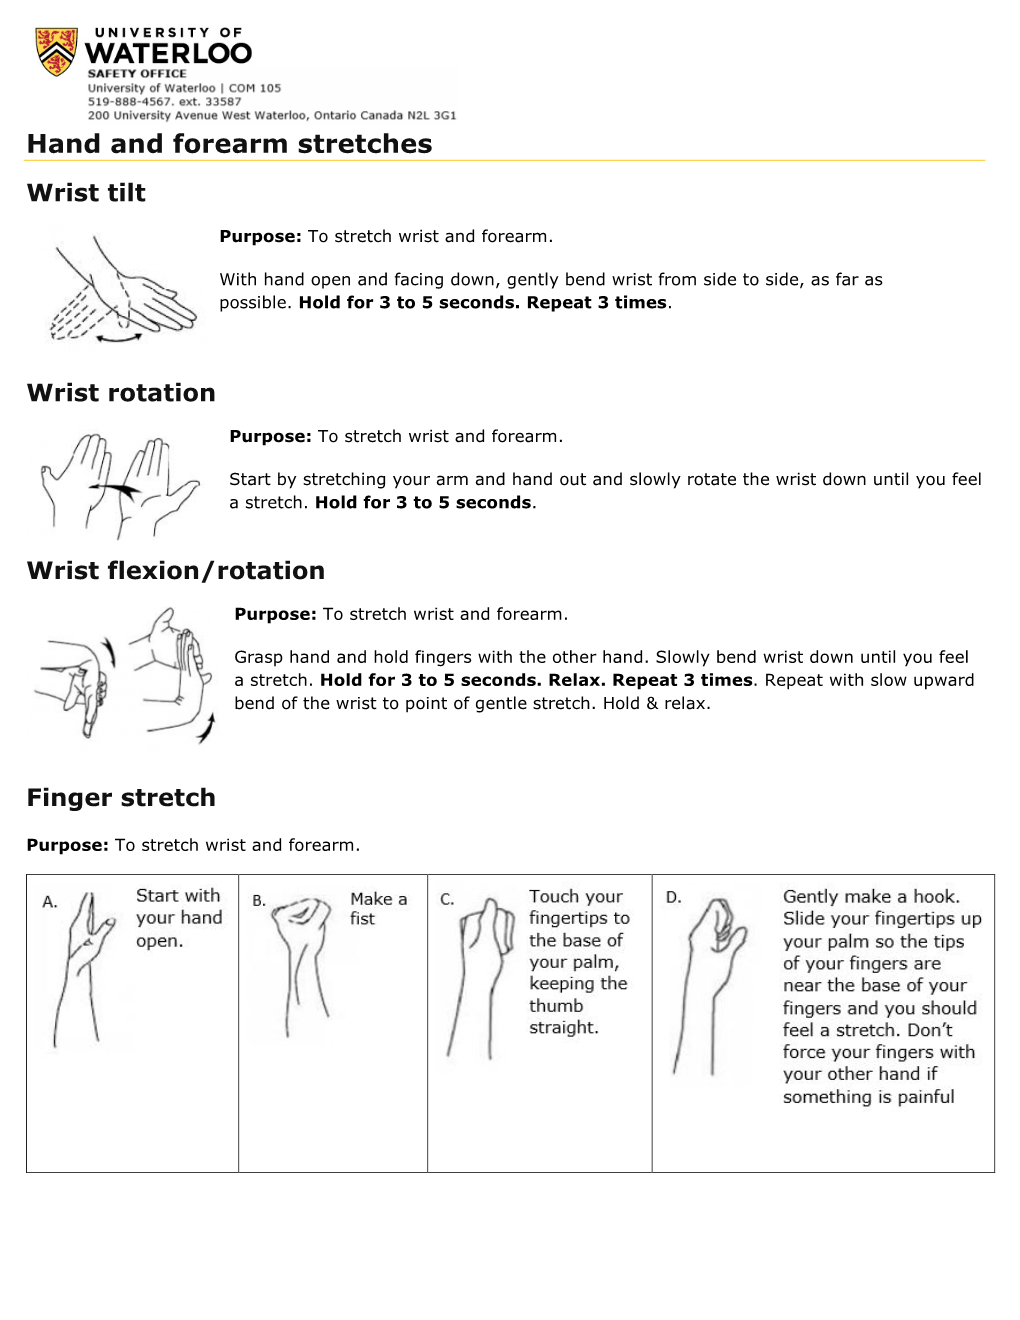 Hand and Forearm Stretches Wrist Tilt